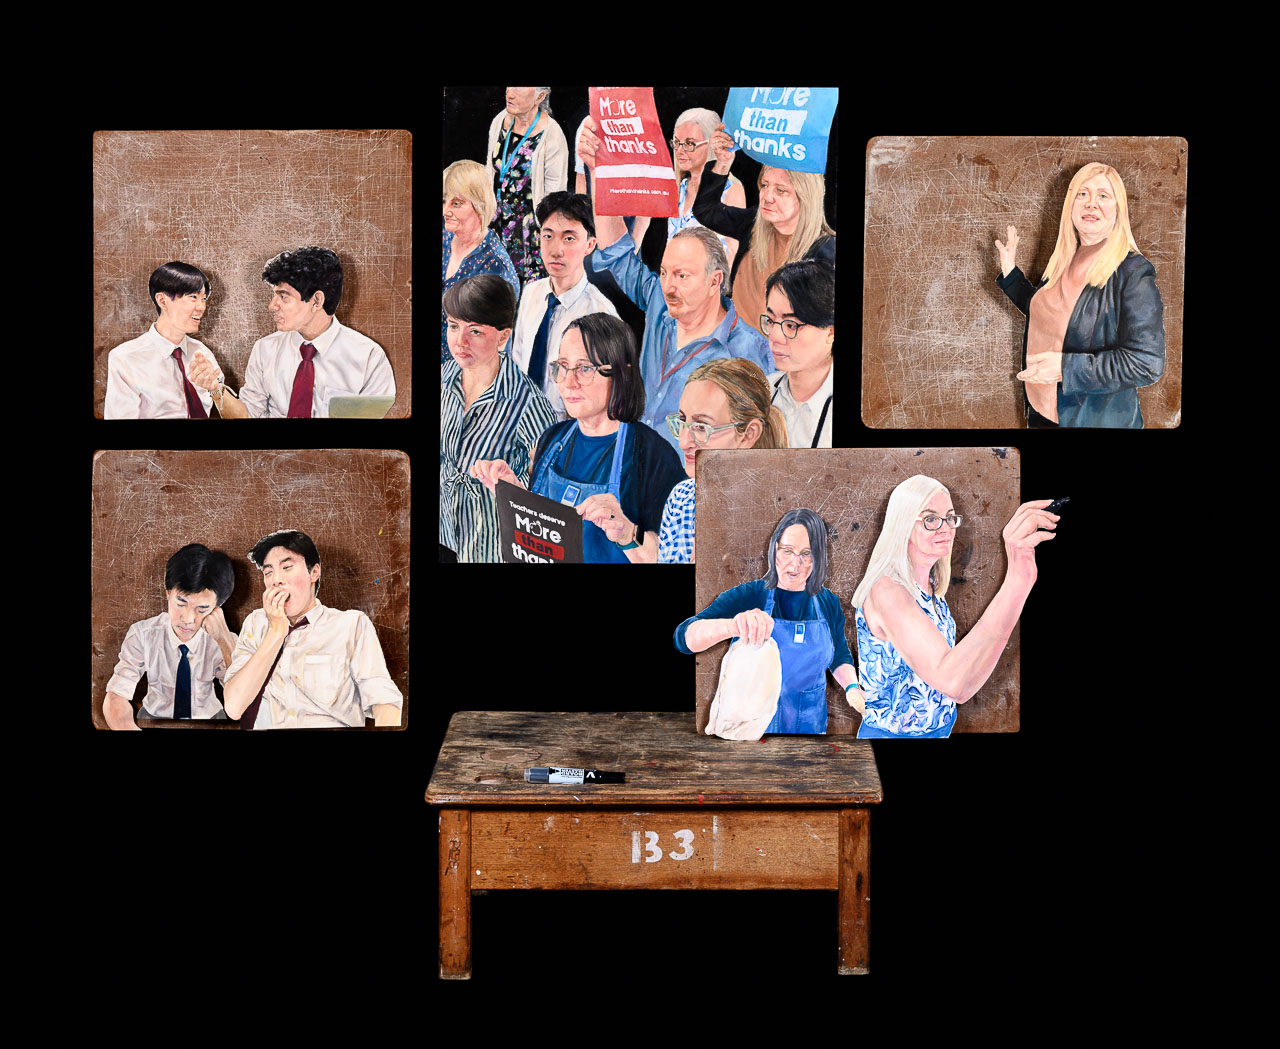 A series of watercolour paintings of students and teachers interacting mounted on old desk tops.